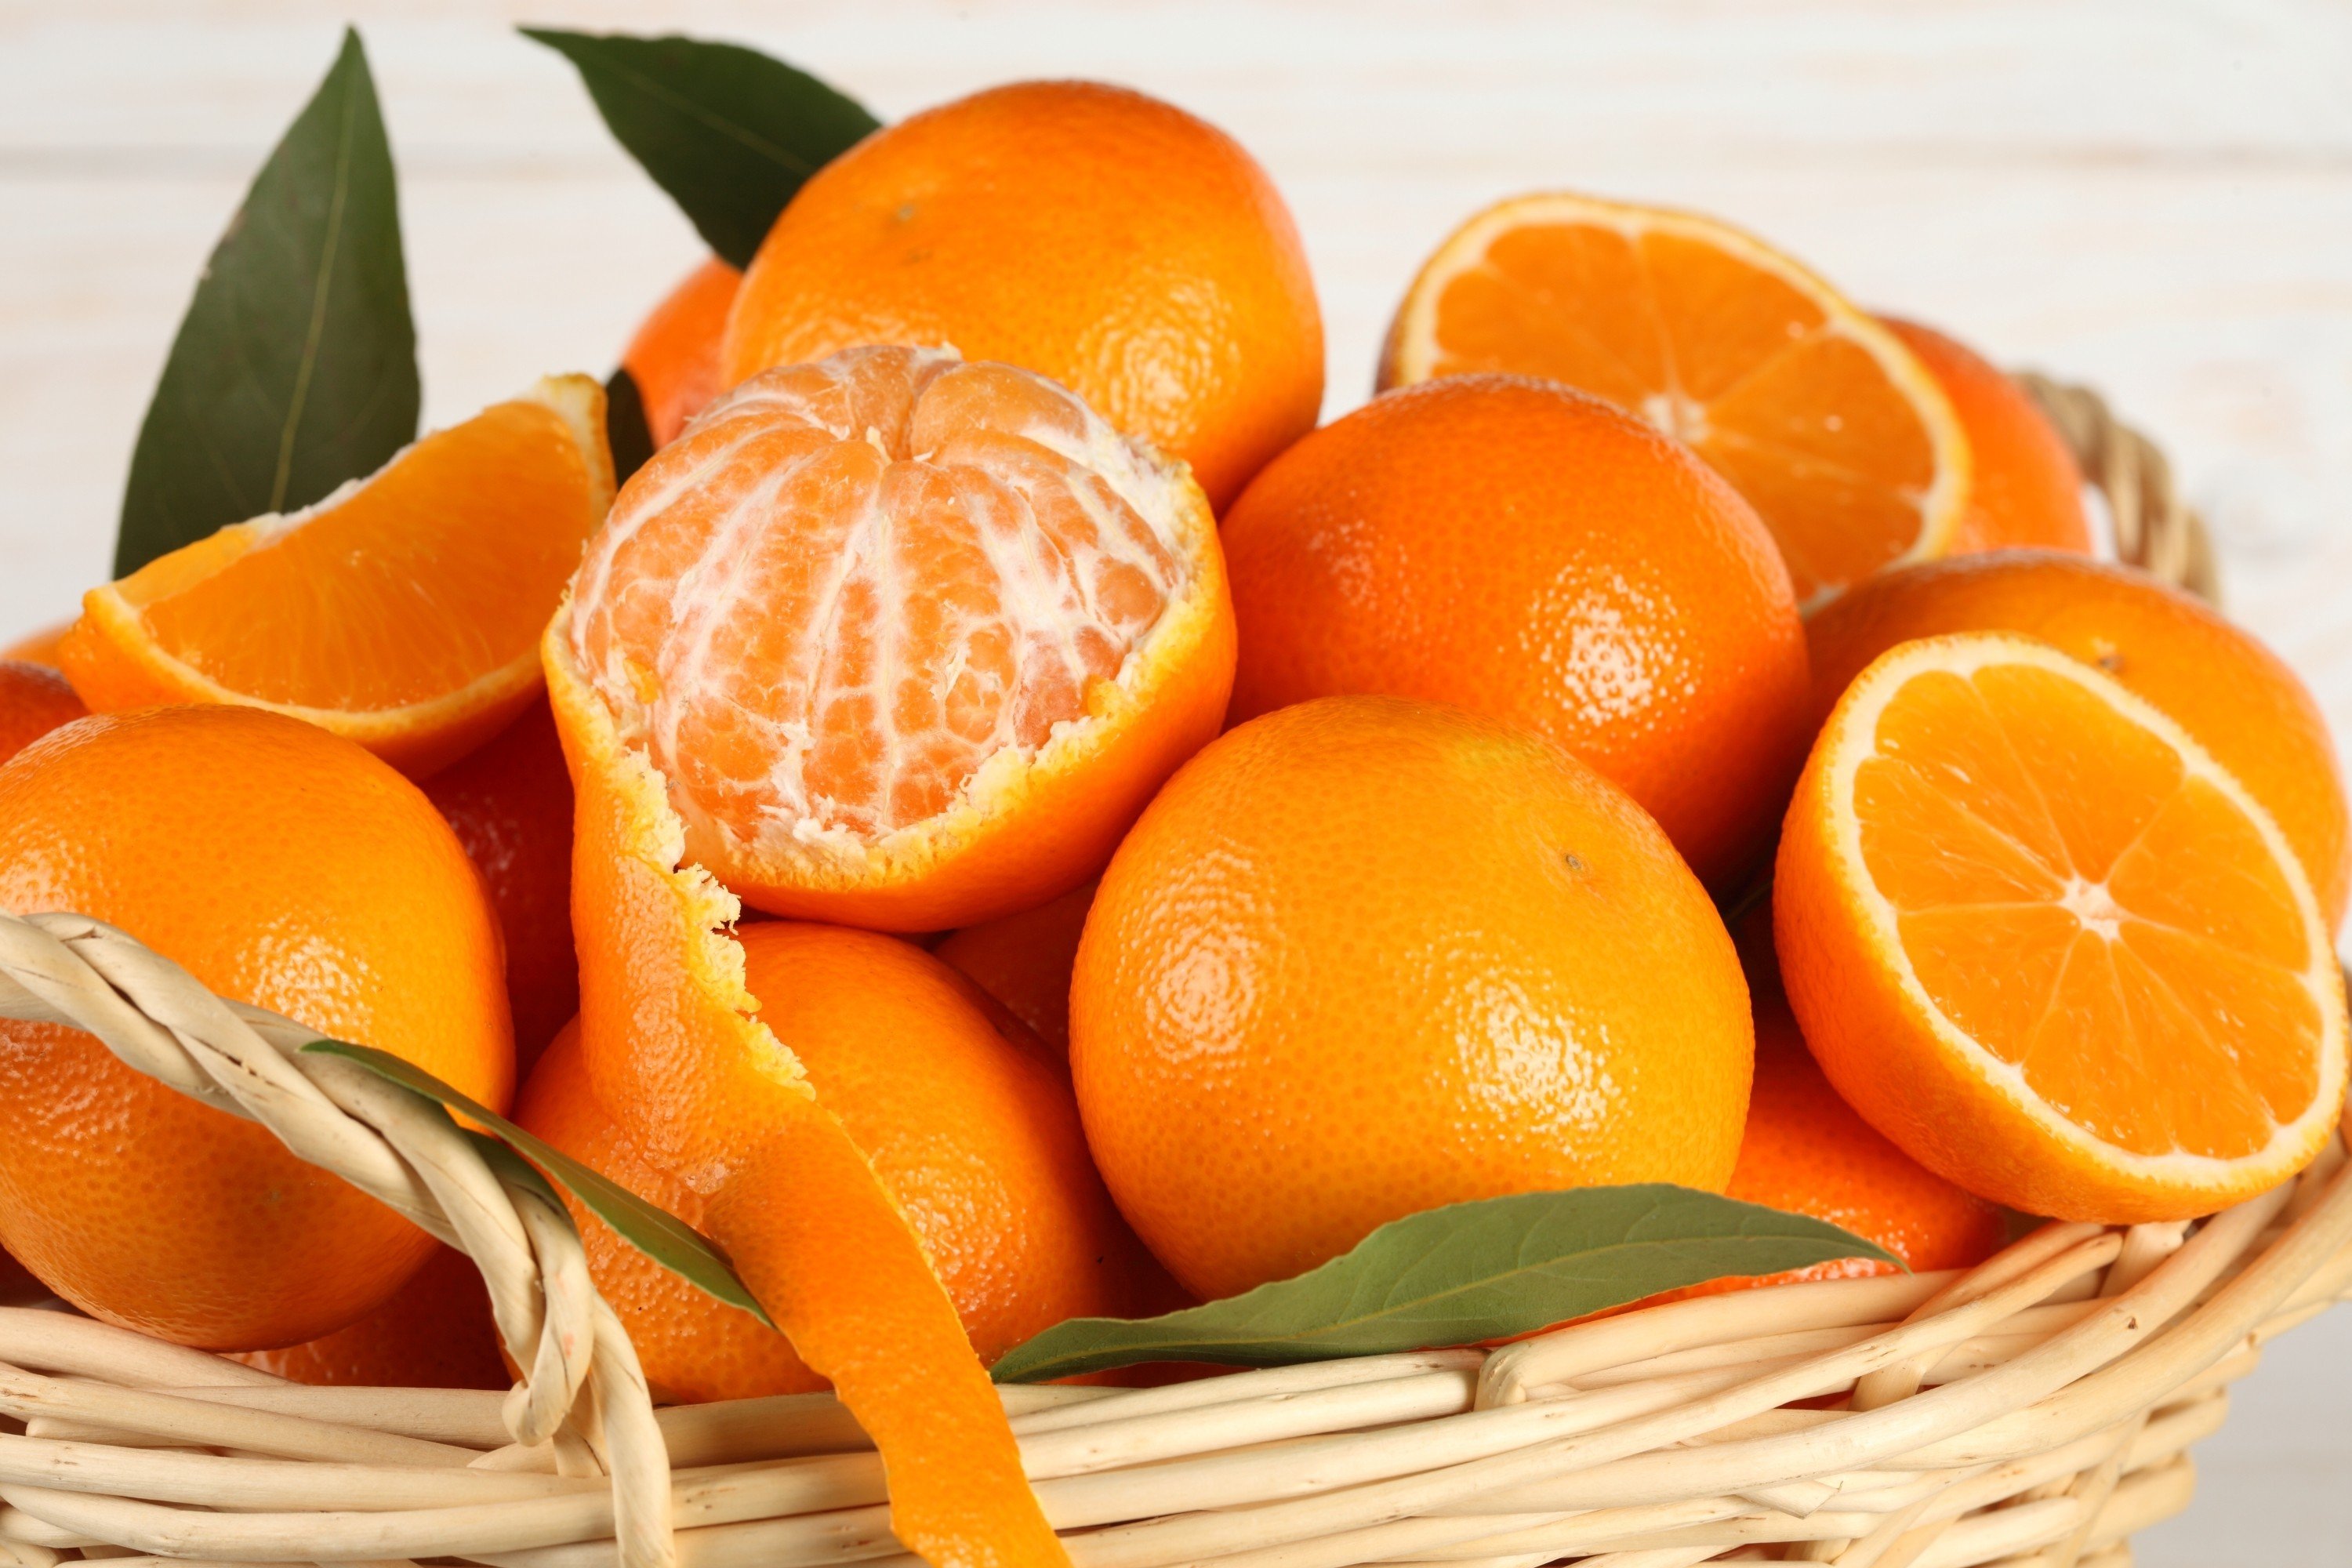 Orange Fruit Baskets Hd Wallpapers Desktop And Mobile Images And Photos